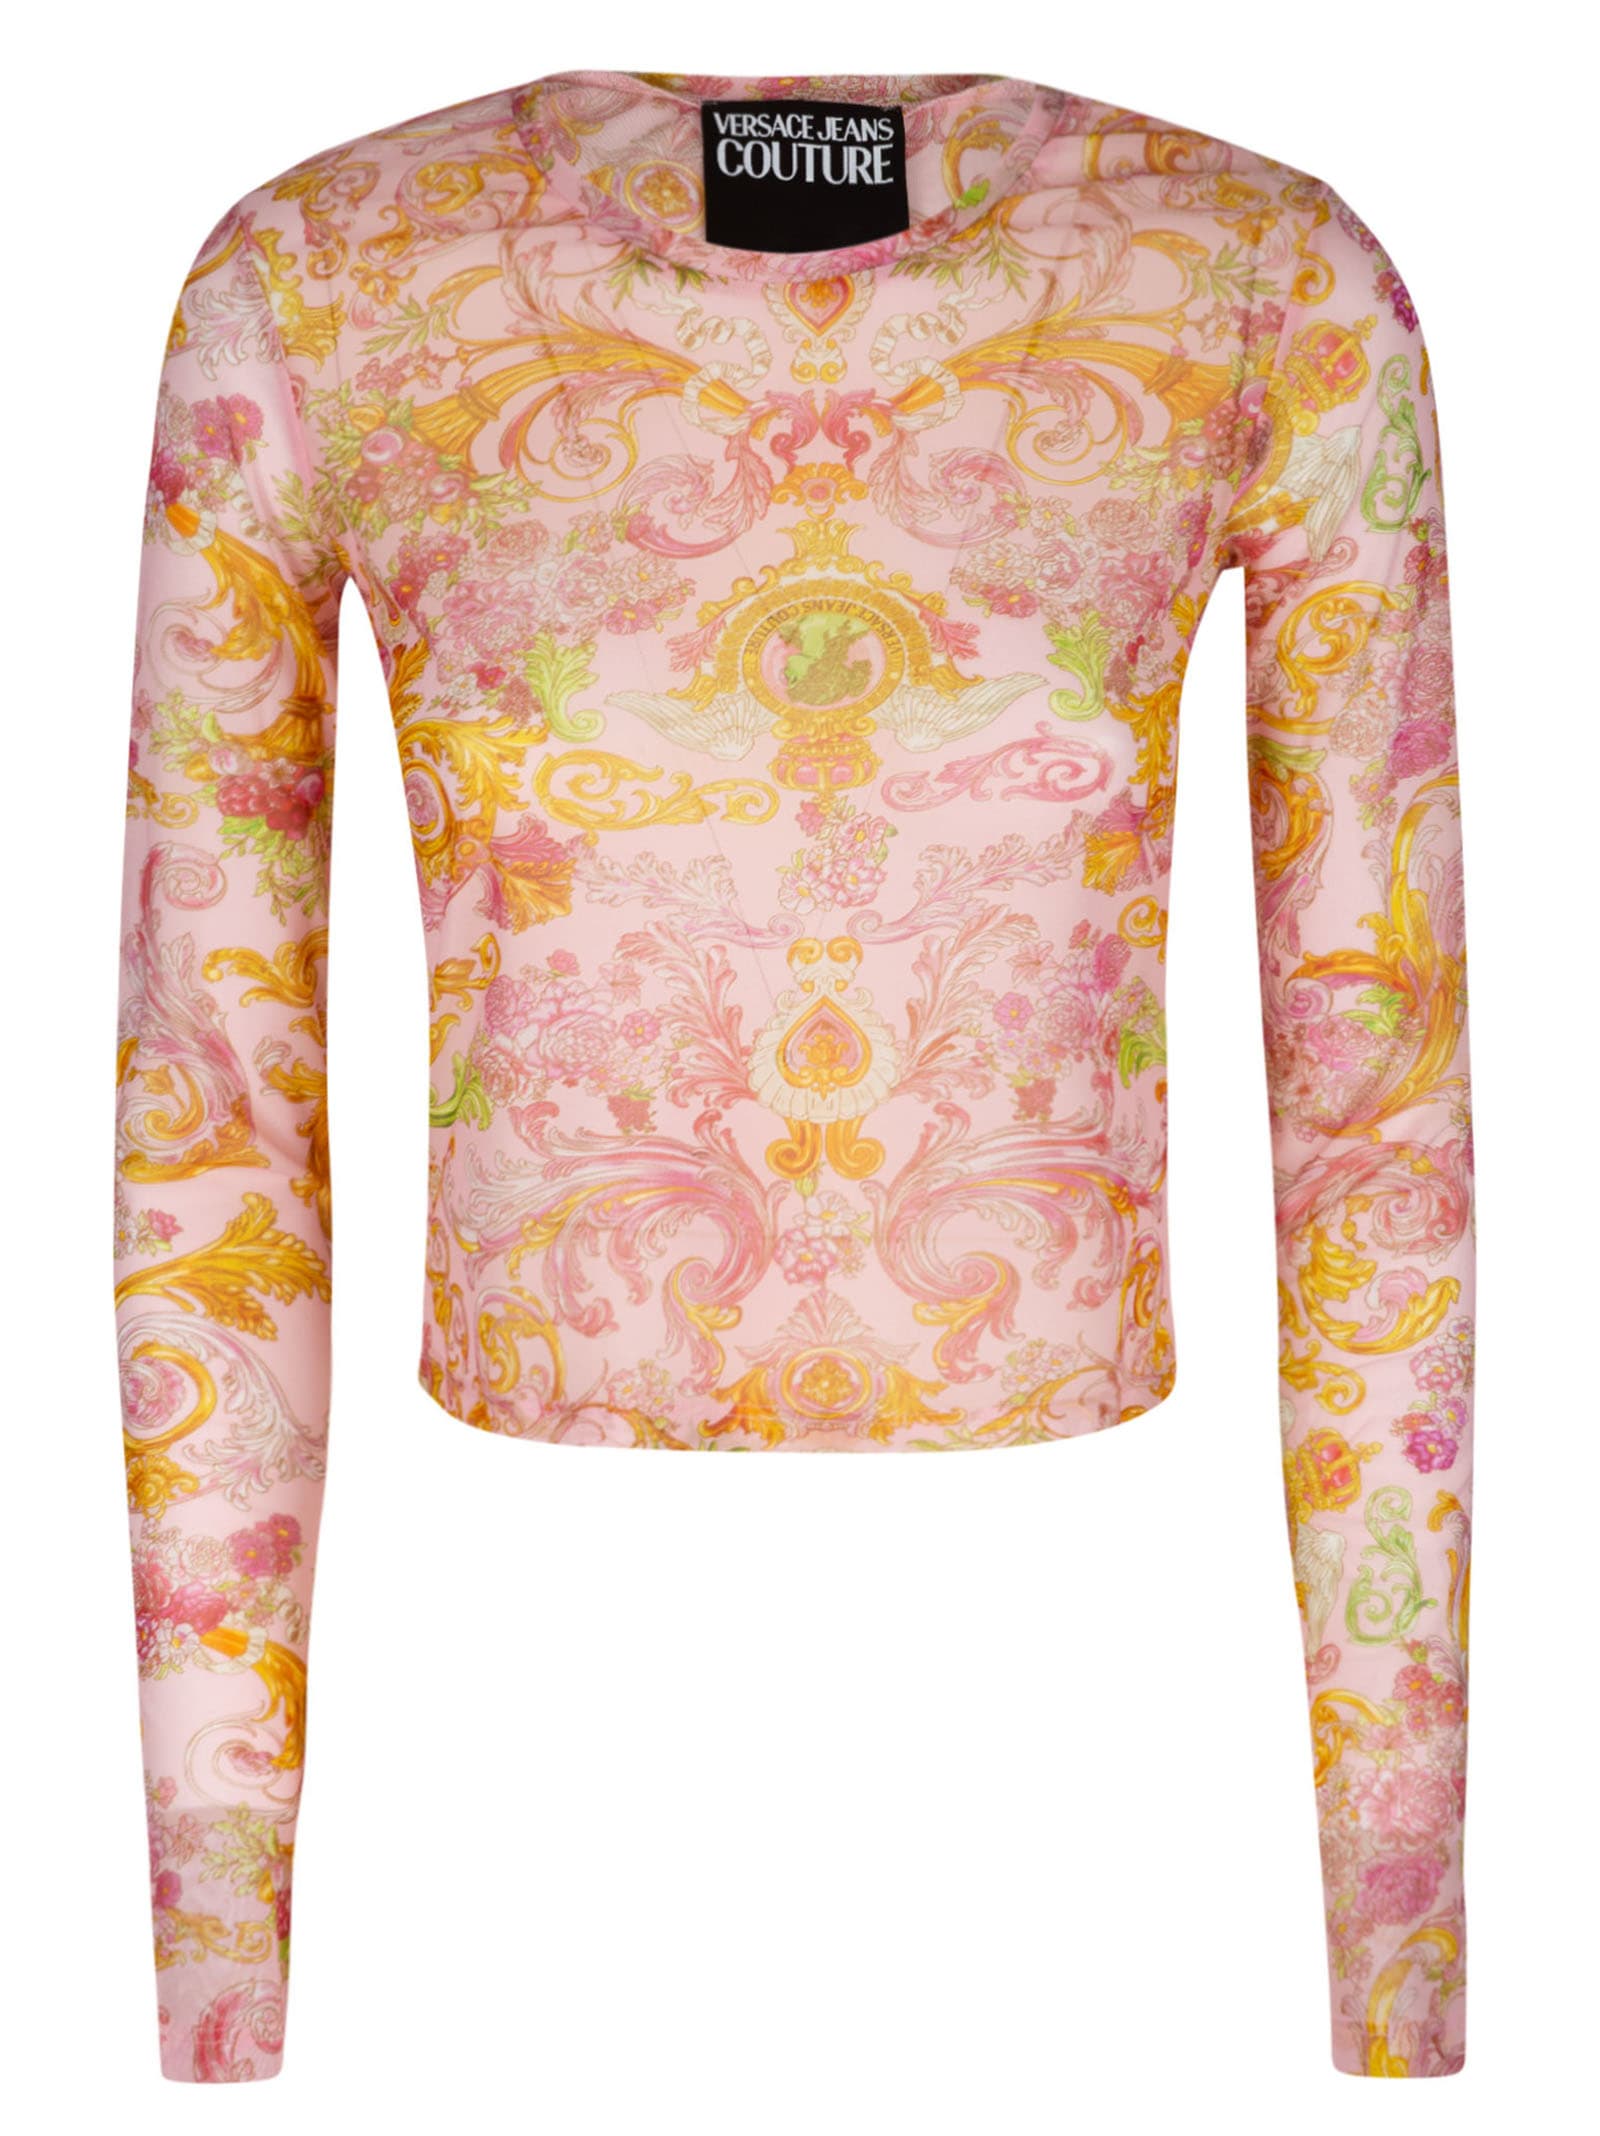 Versace Jeans Couture All-over Printed Top